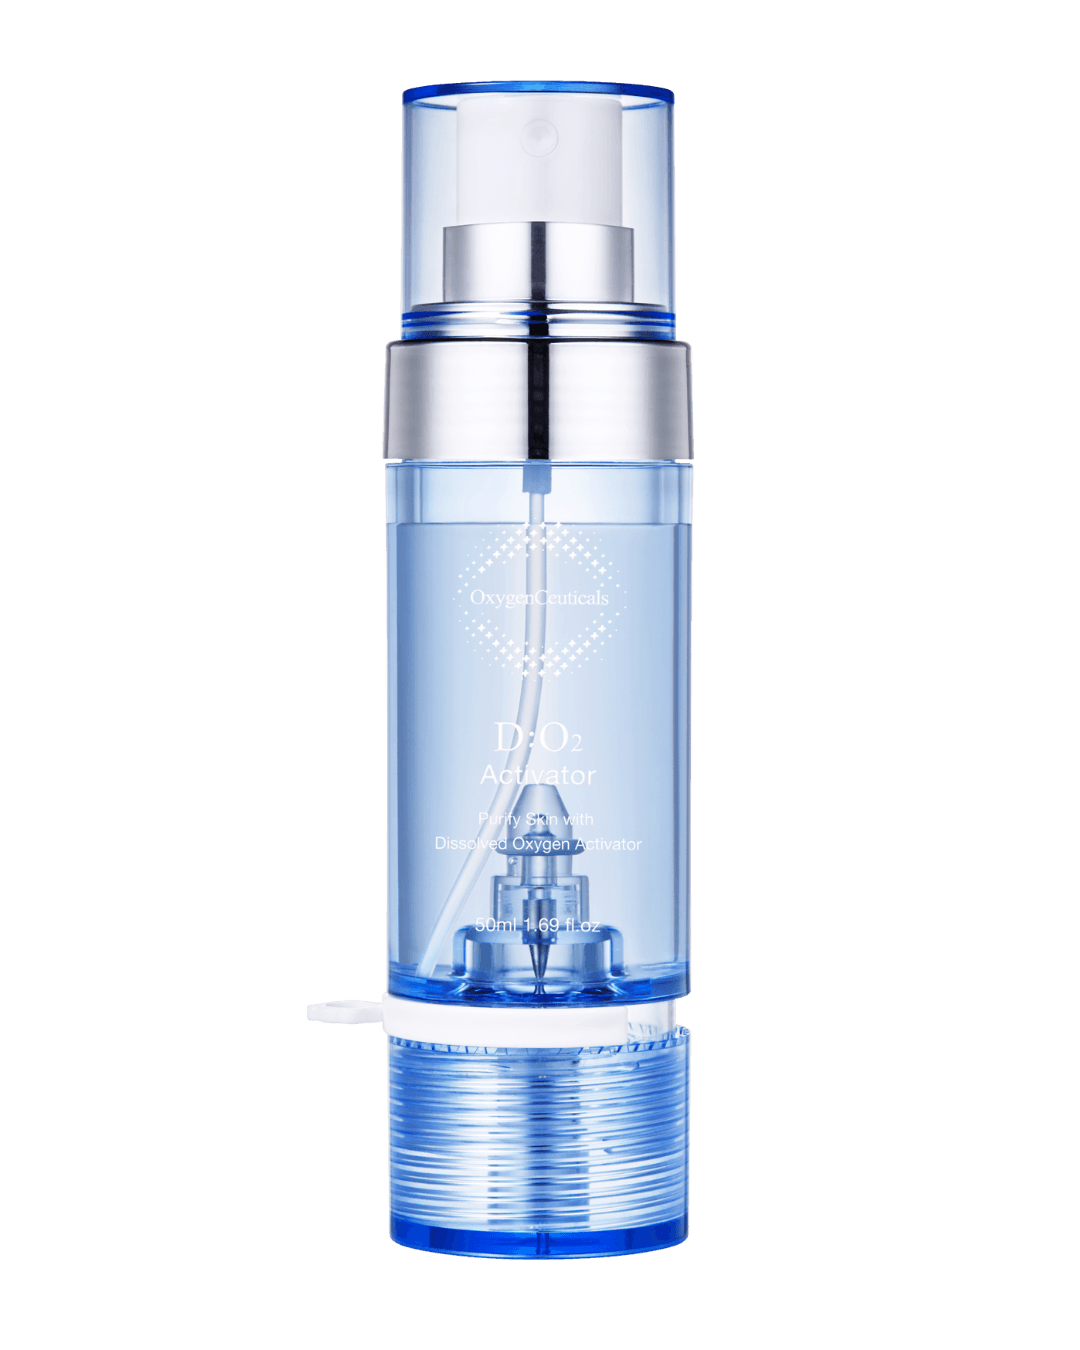 Daily Vanity Beauty Awards 2024 Best Skincare Oxygenceuticals D:O2 Activator Voted By Beauty Experts